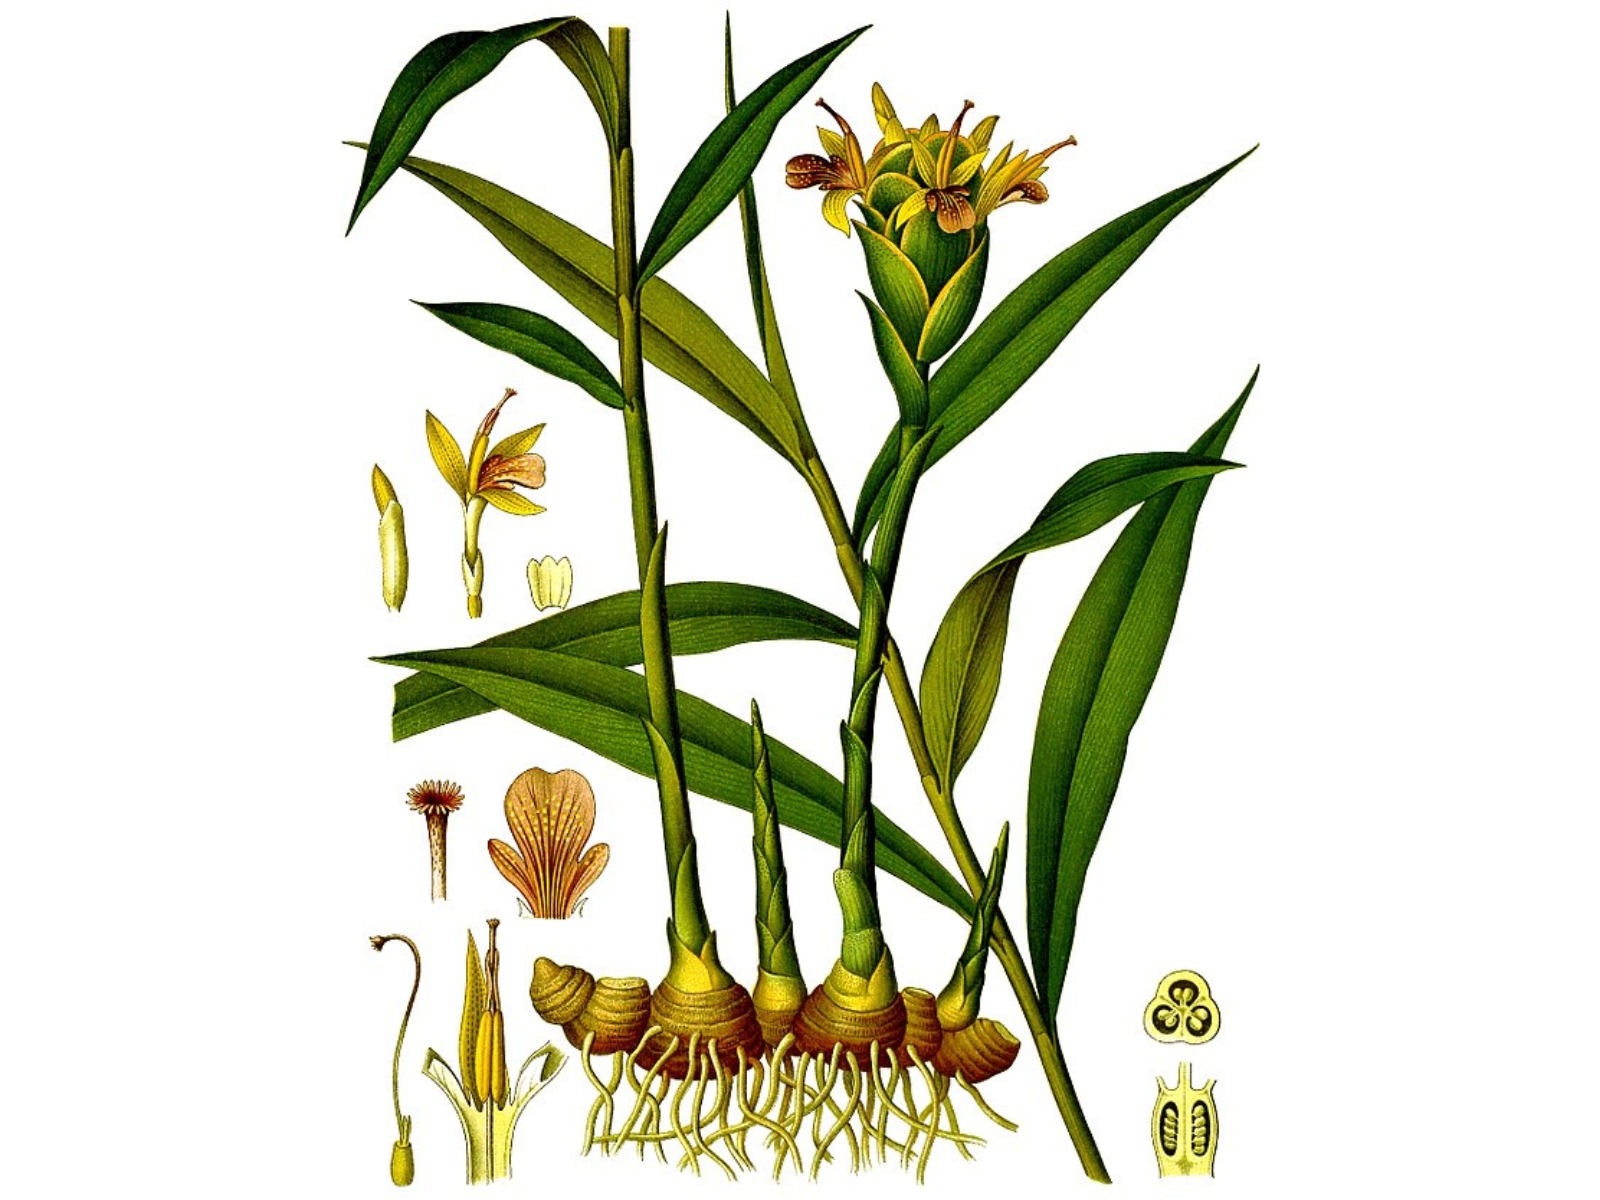 An illustration of the elements of a ginger plant, from roots to flowers.